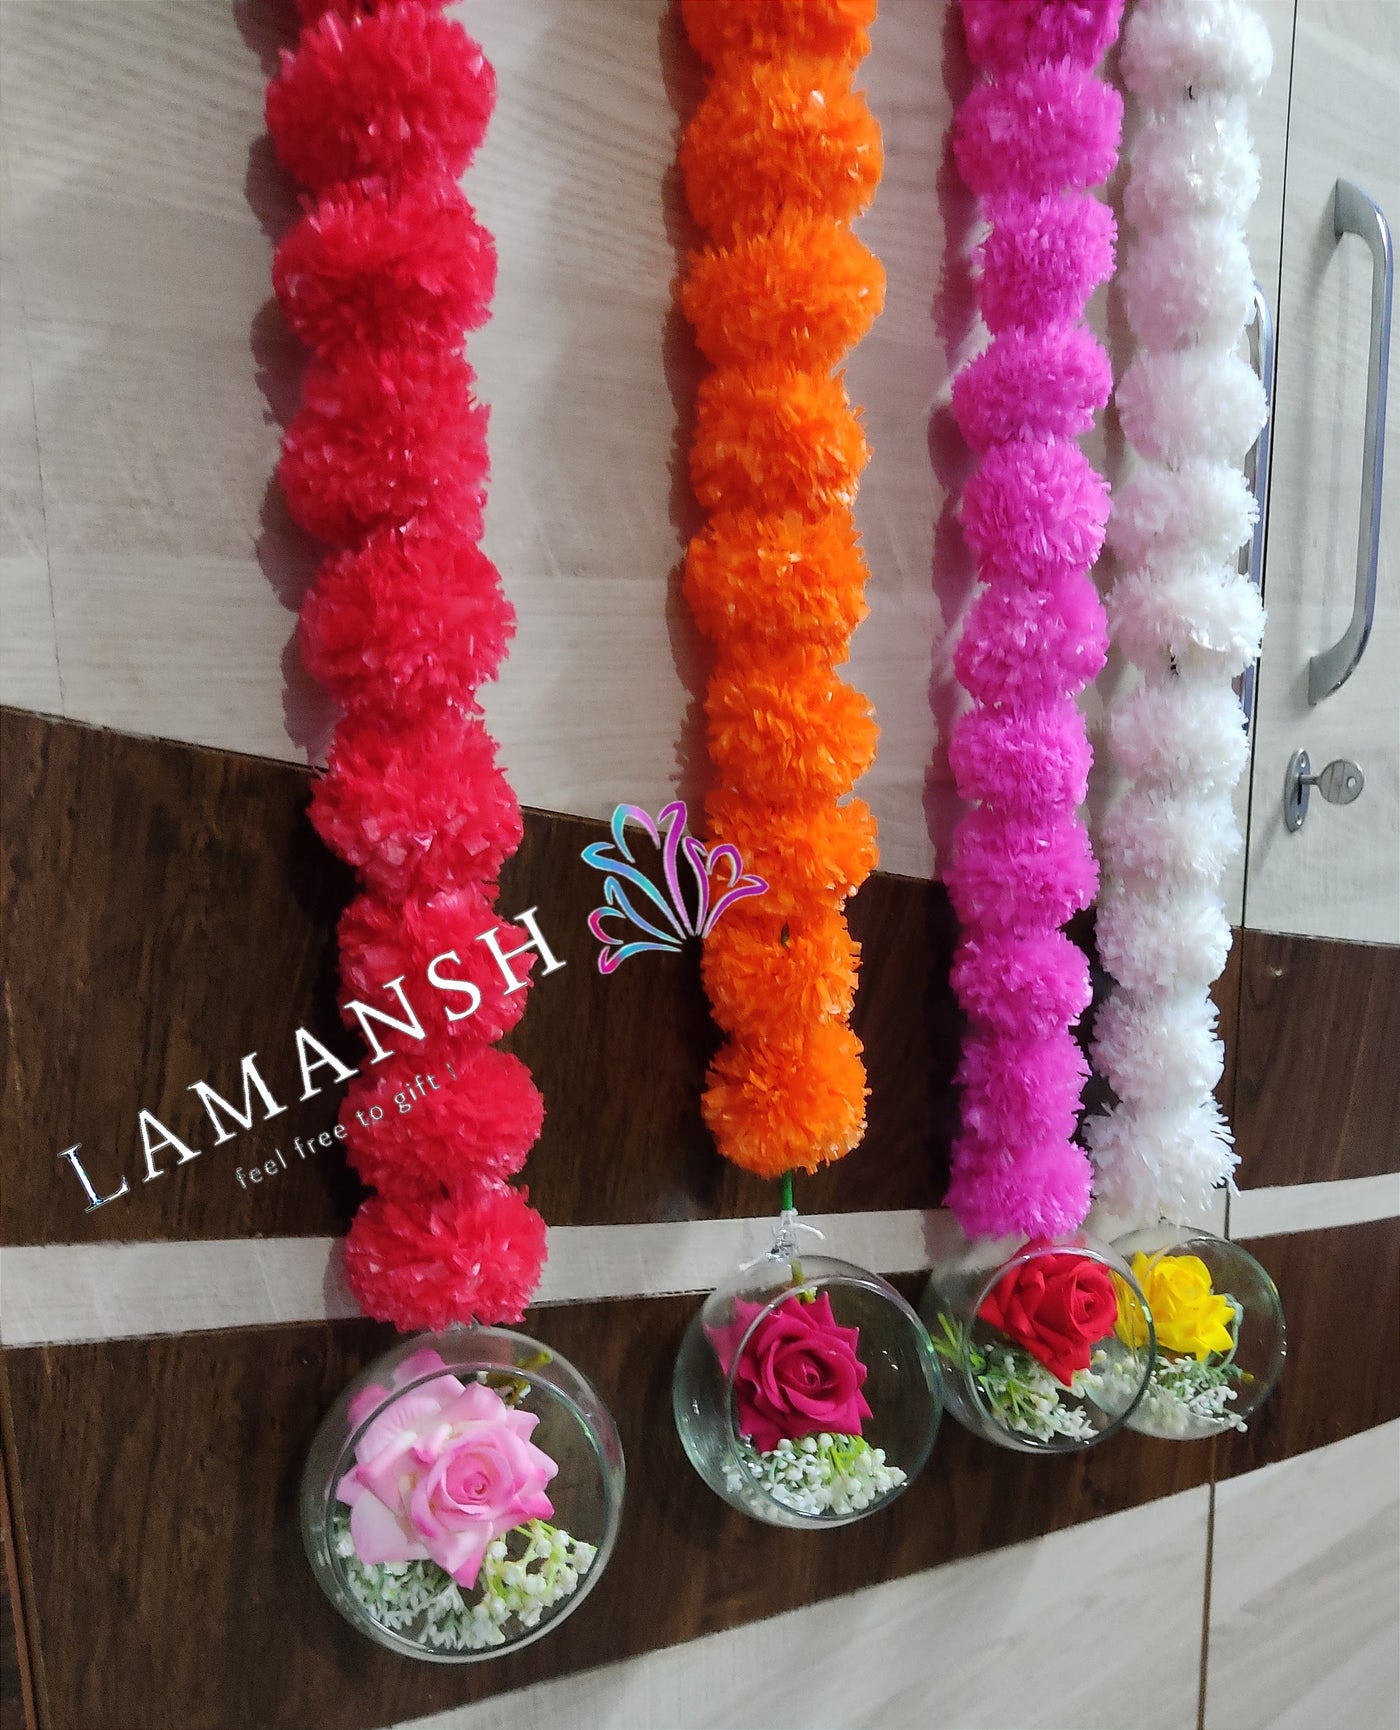 LAMANSH TeaLight Holder LAMANSH® ( Pack of 5 ) 4.5 feet Glass Decorative Candle holder with Rose 🌹 & Gypsophilla Flowers attached to marigold artificial flower garlands / Decorative hanging for birthday anniversary ,Wedding Party Event Backdrop Decoration ✨